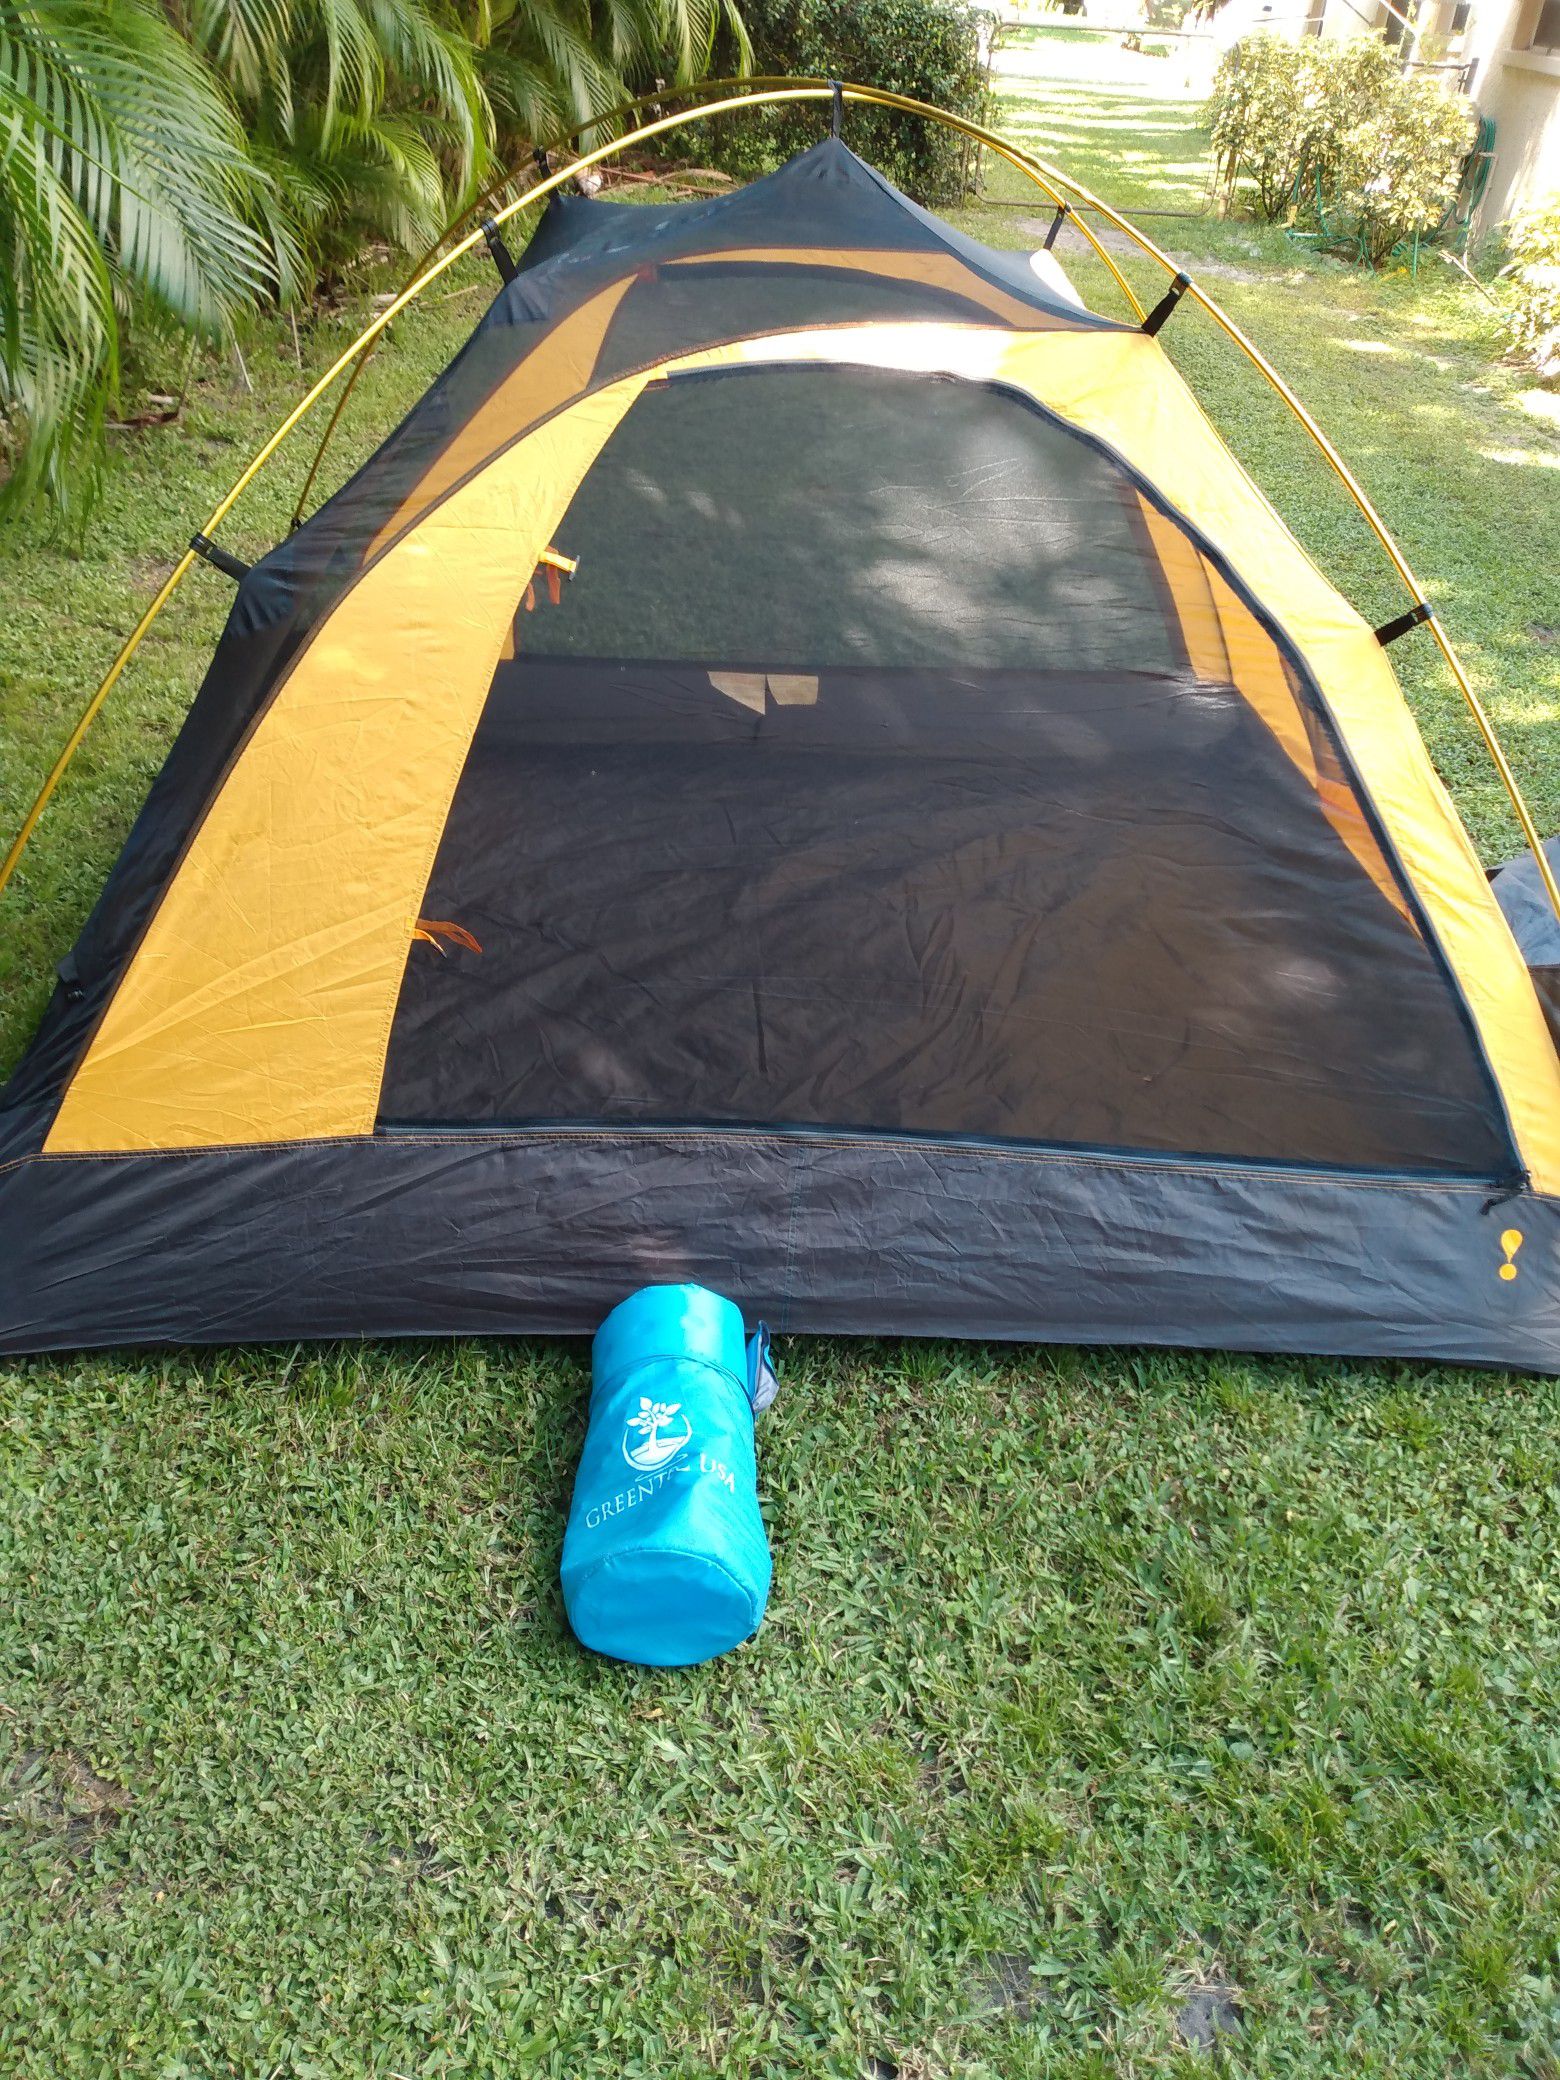 New tent with air mattress